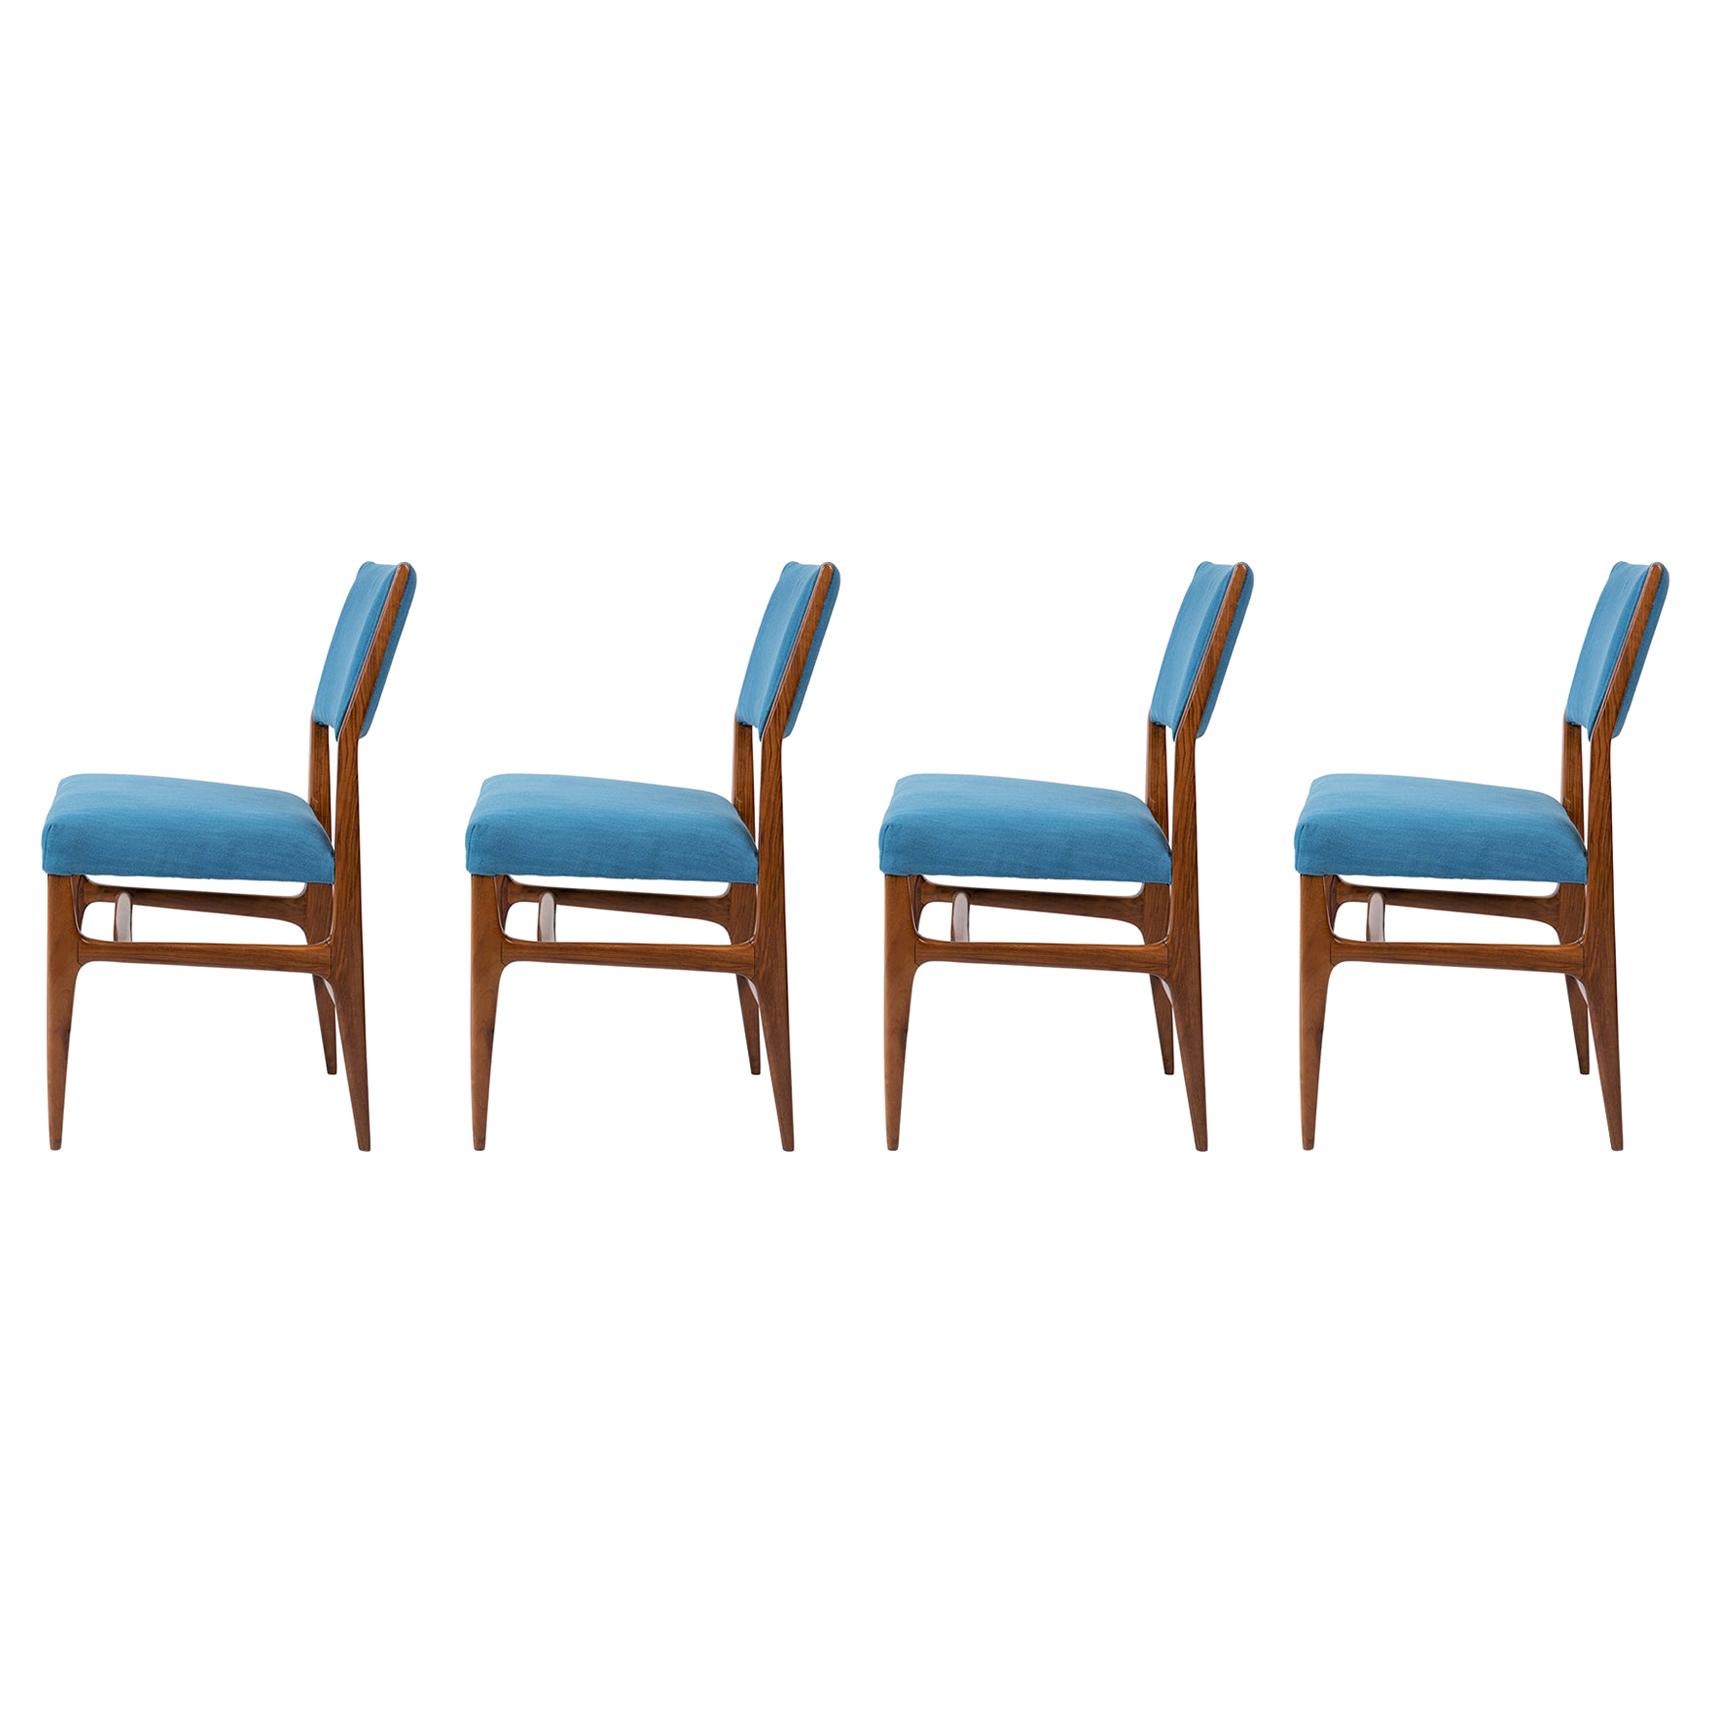 Gio Ponti Walnut Dining Chairs for Singer & Sons with Blue Upholstery, Set of 4 